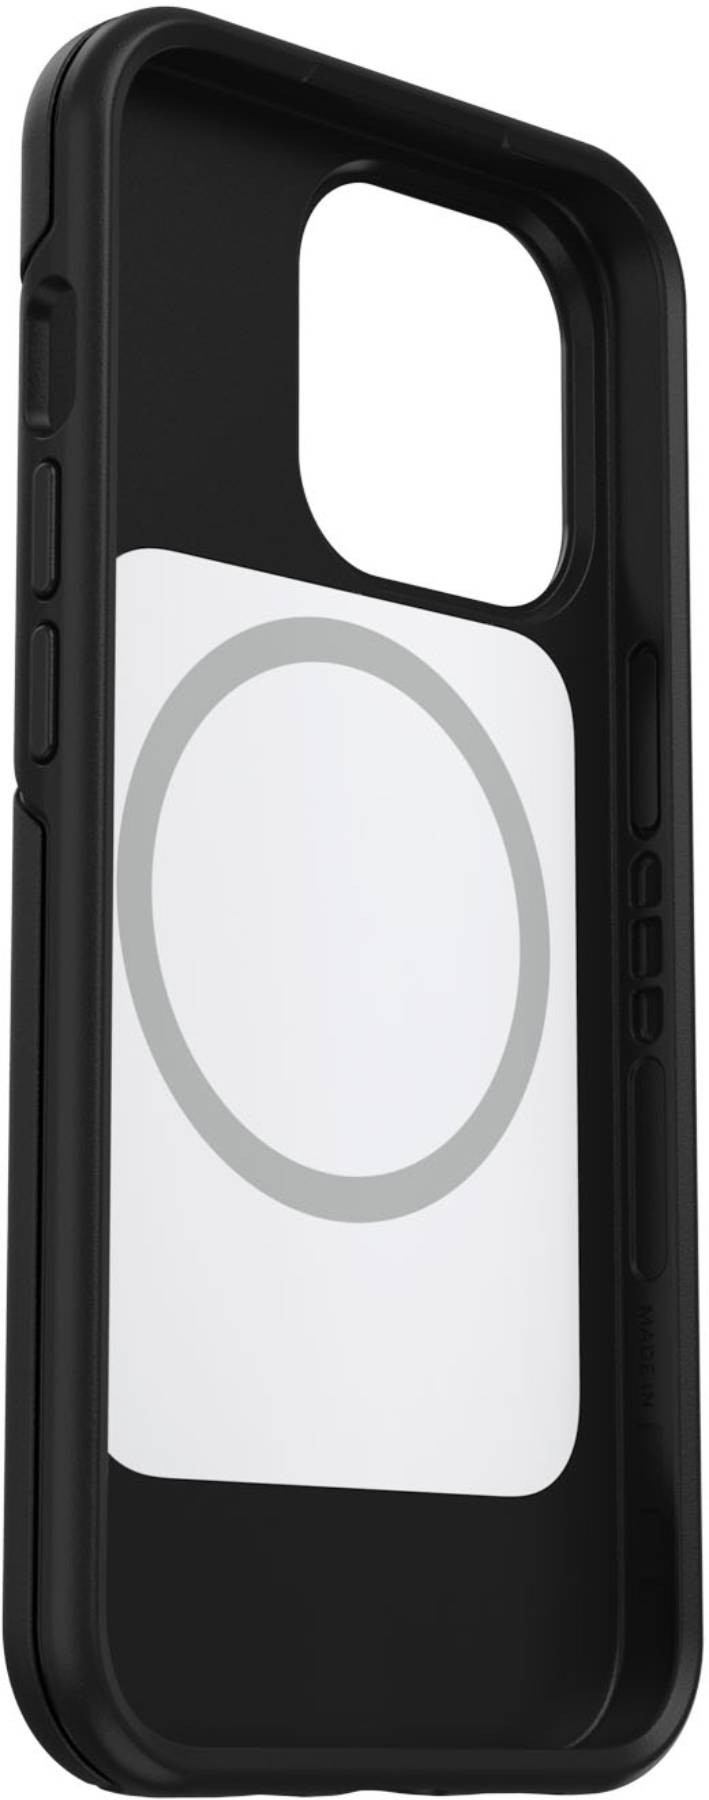 OTTERBOX Film protection  - OTTERBOX-FILM-GALS22